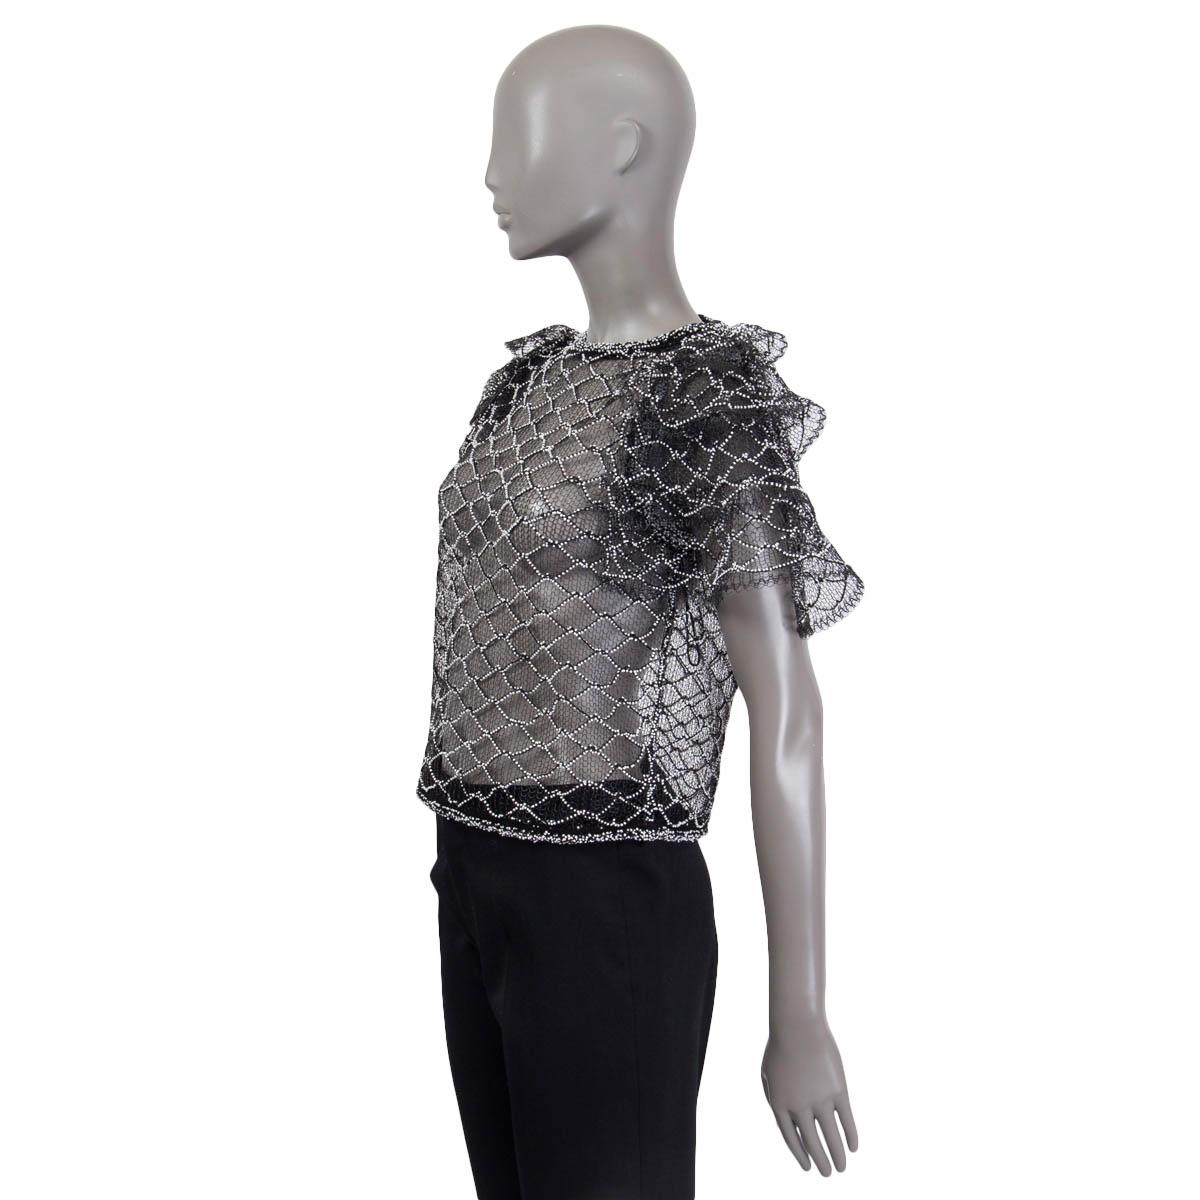 100% authentic Chanel Spring/Summer 2018 beaded top in black polyester (95%) and cotton (5%). Features puff sleeves and opens with a 'CC' button on the back. Unlined. Has been worn once and is in virtually new condition.

Measurements
Tag